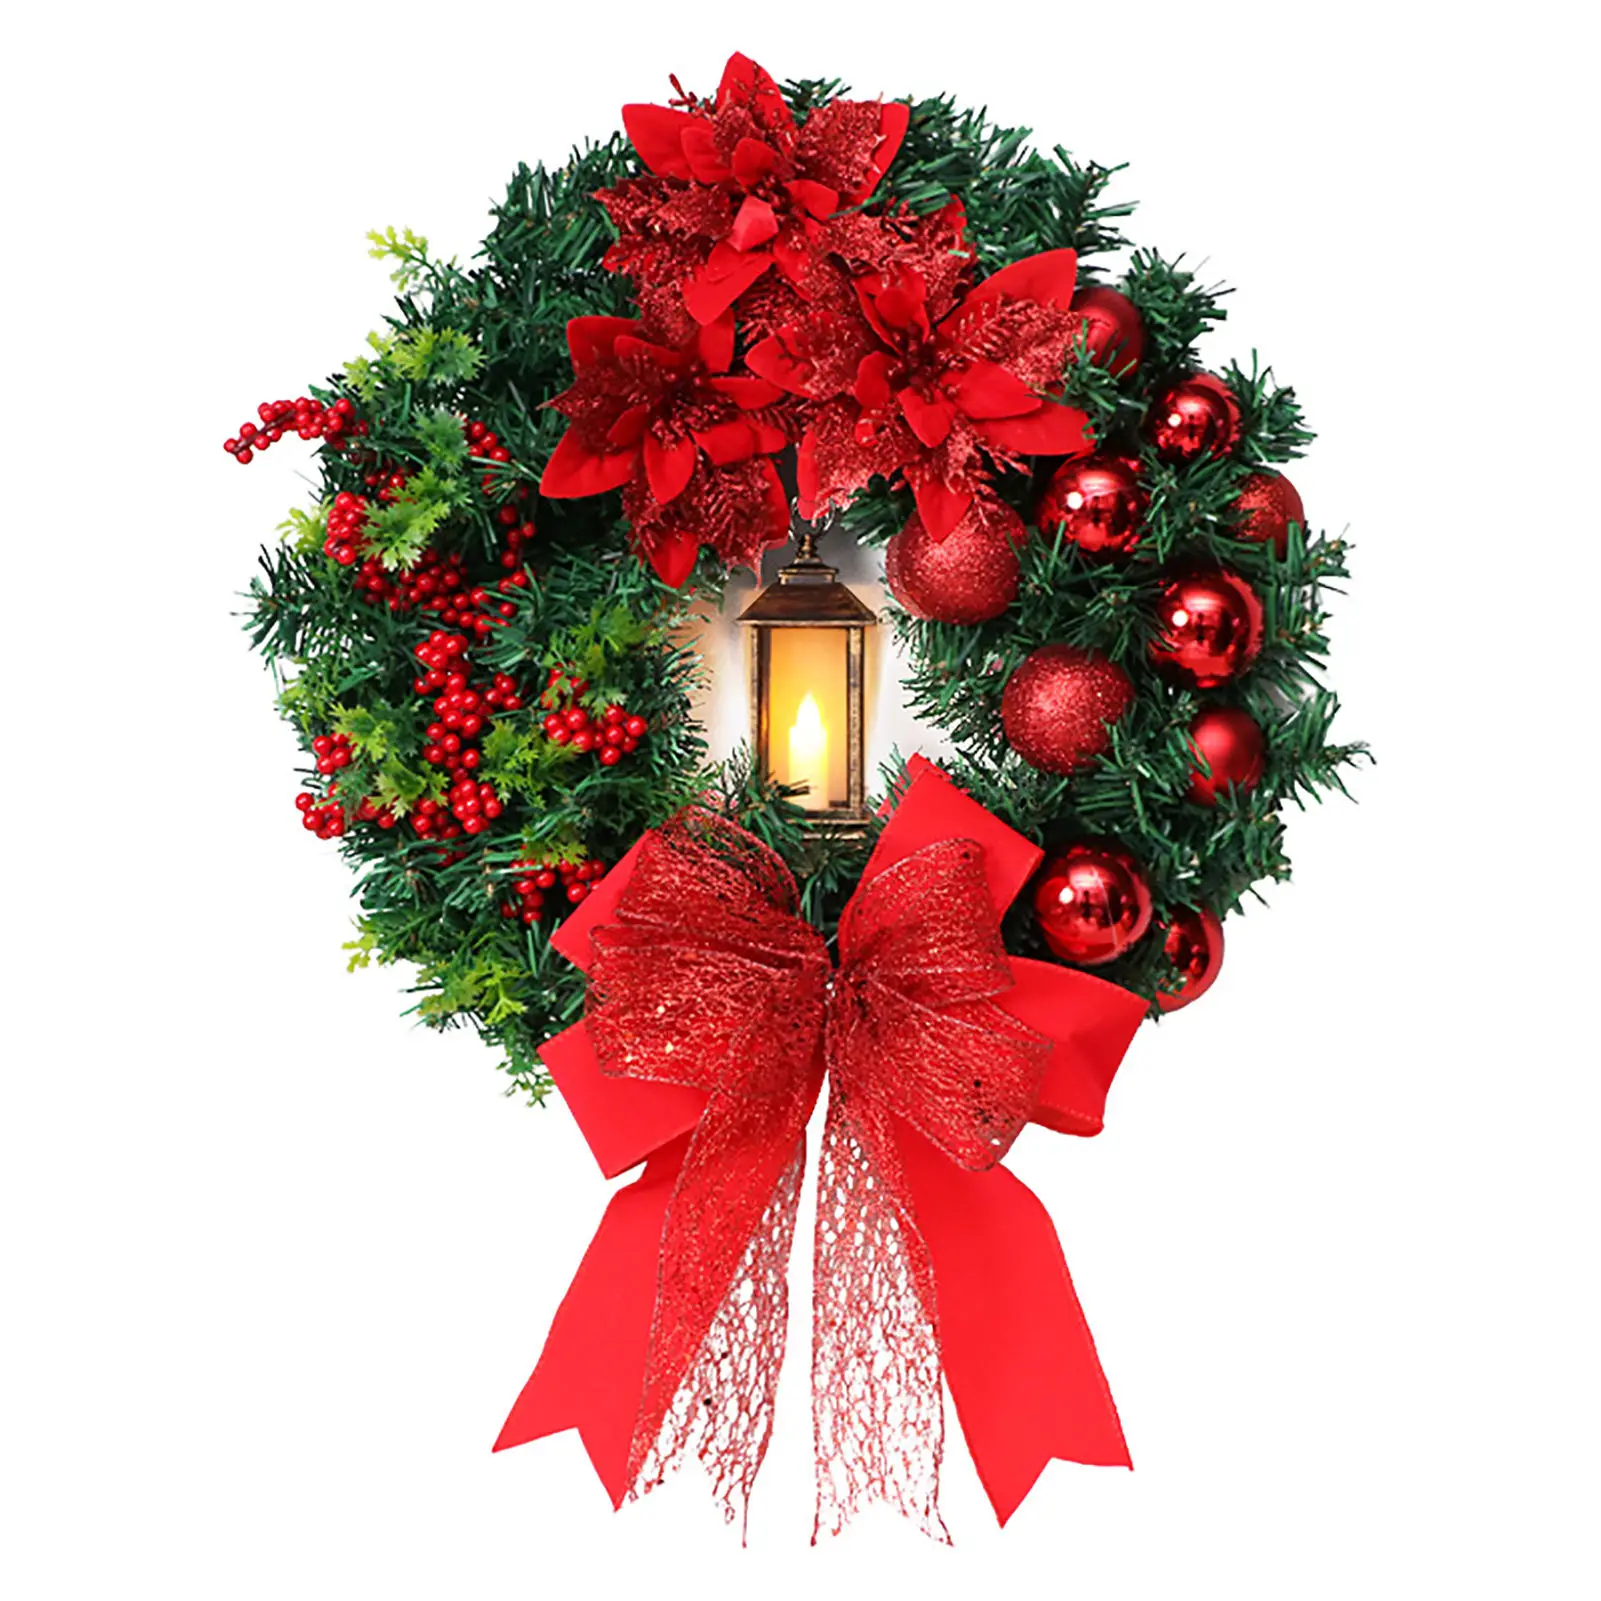 

Front Door Spruce Lighted Wreath Christmas Front Door Wreath With Large Red Bow Balls Berries Flowers For Holiday Christmas Pa